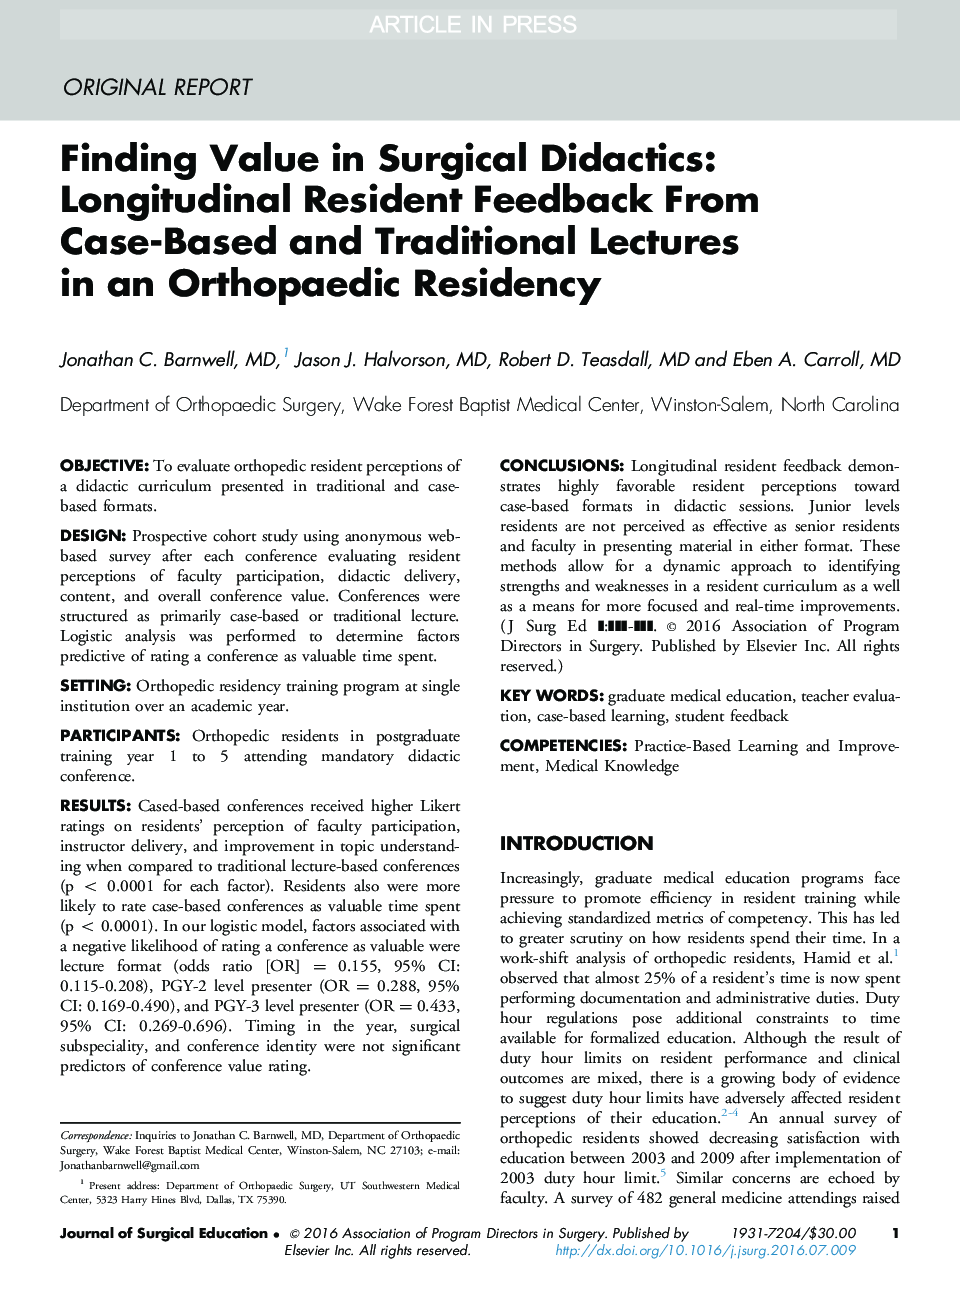 Finding Value in Surgical Didactics: Longitudinal Resident Feedback From Case-Based and Traditional Lectures in an Orthopaedic Residency